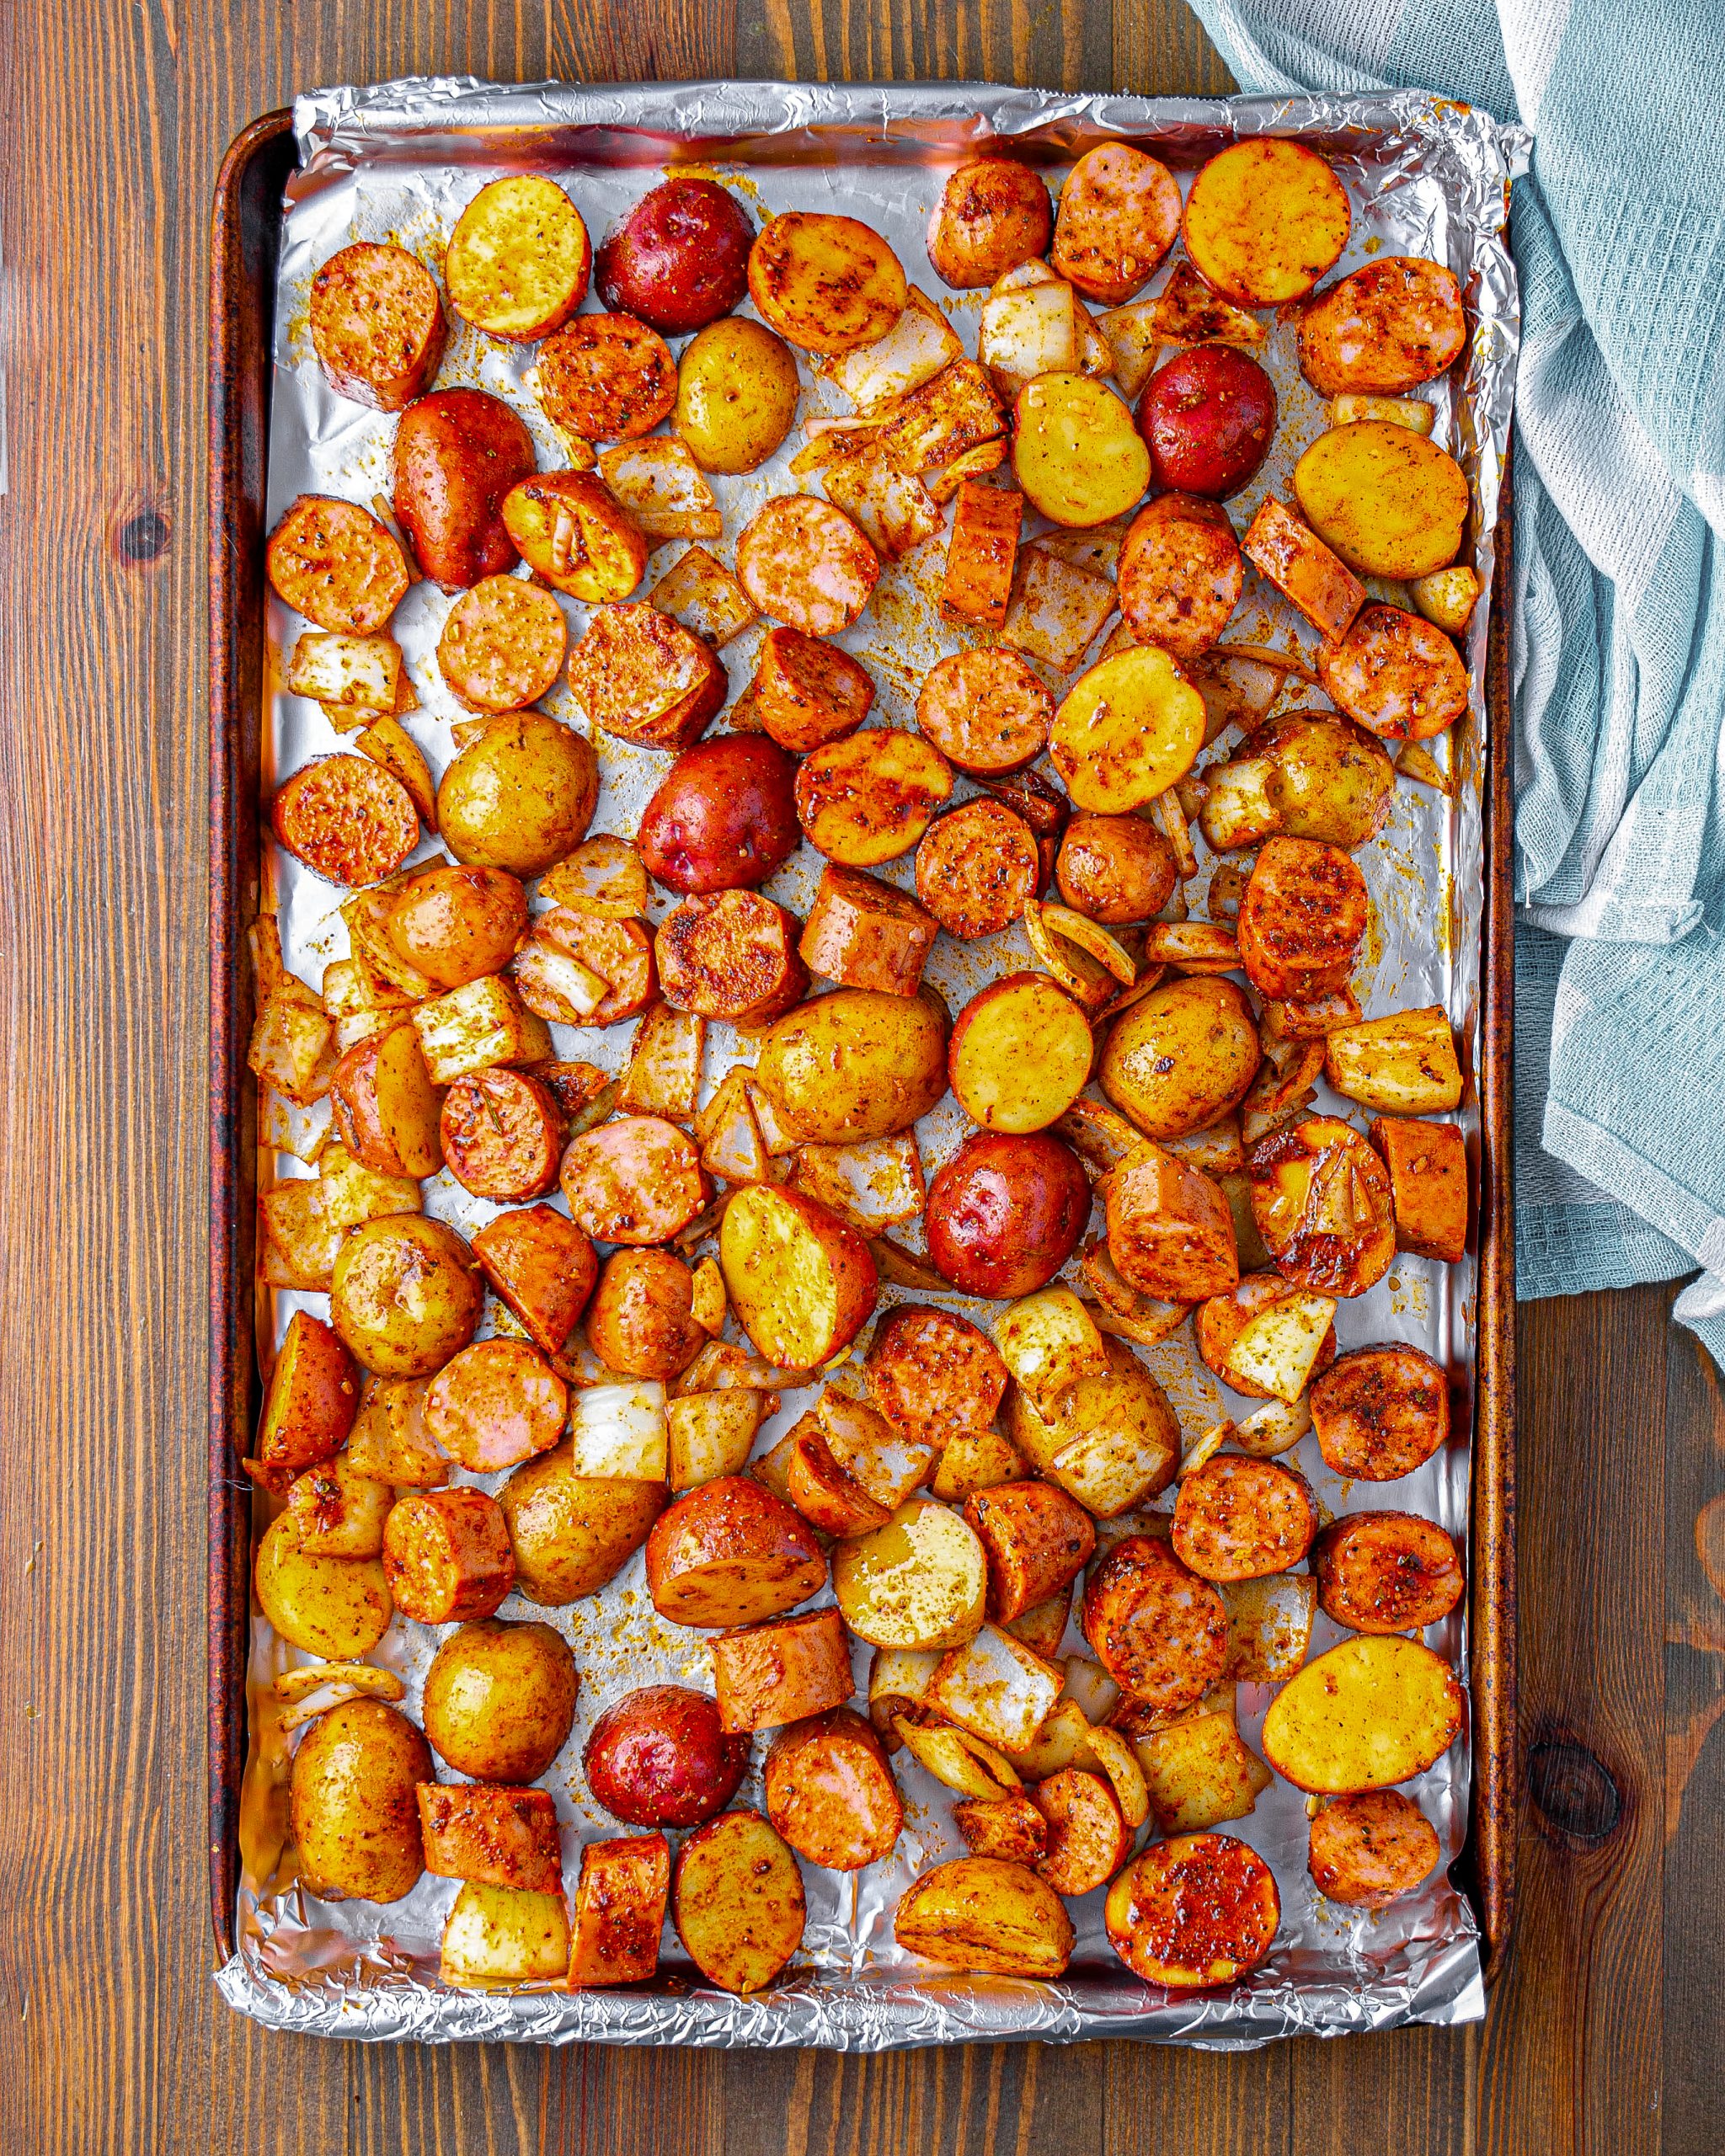 Pour this out onto the sheet pan and spread out the sausage and potatoes evenly.